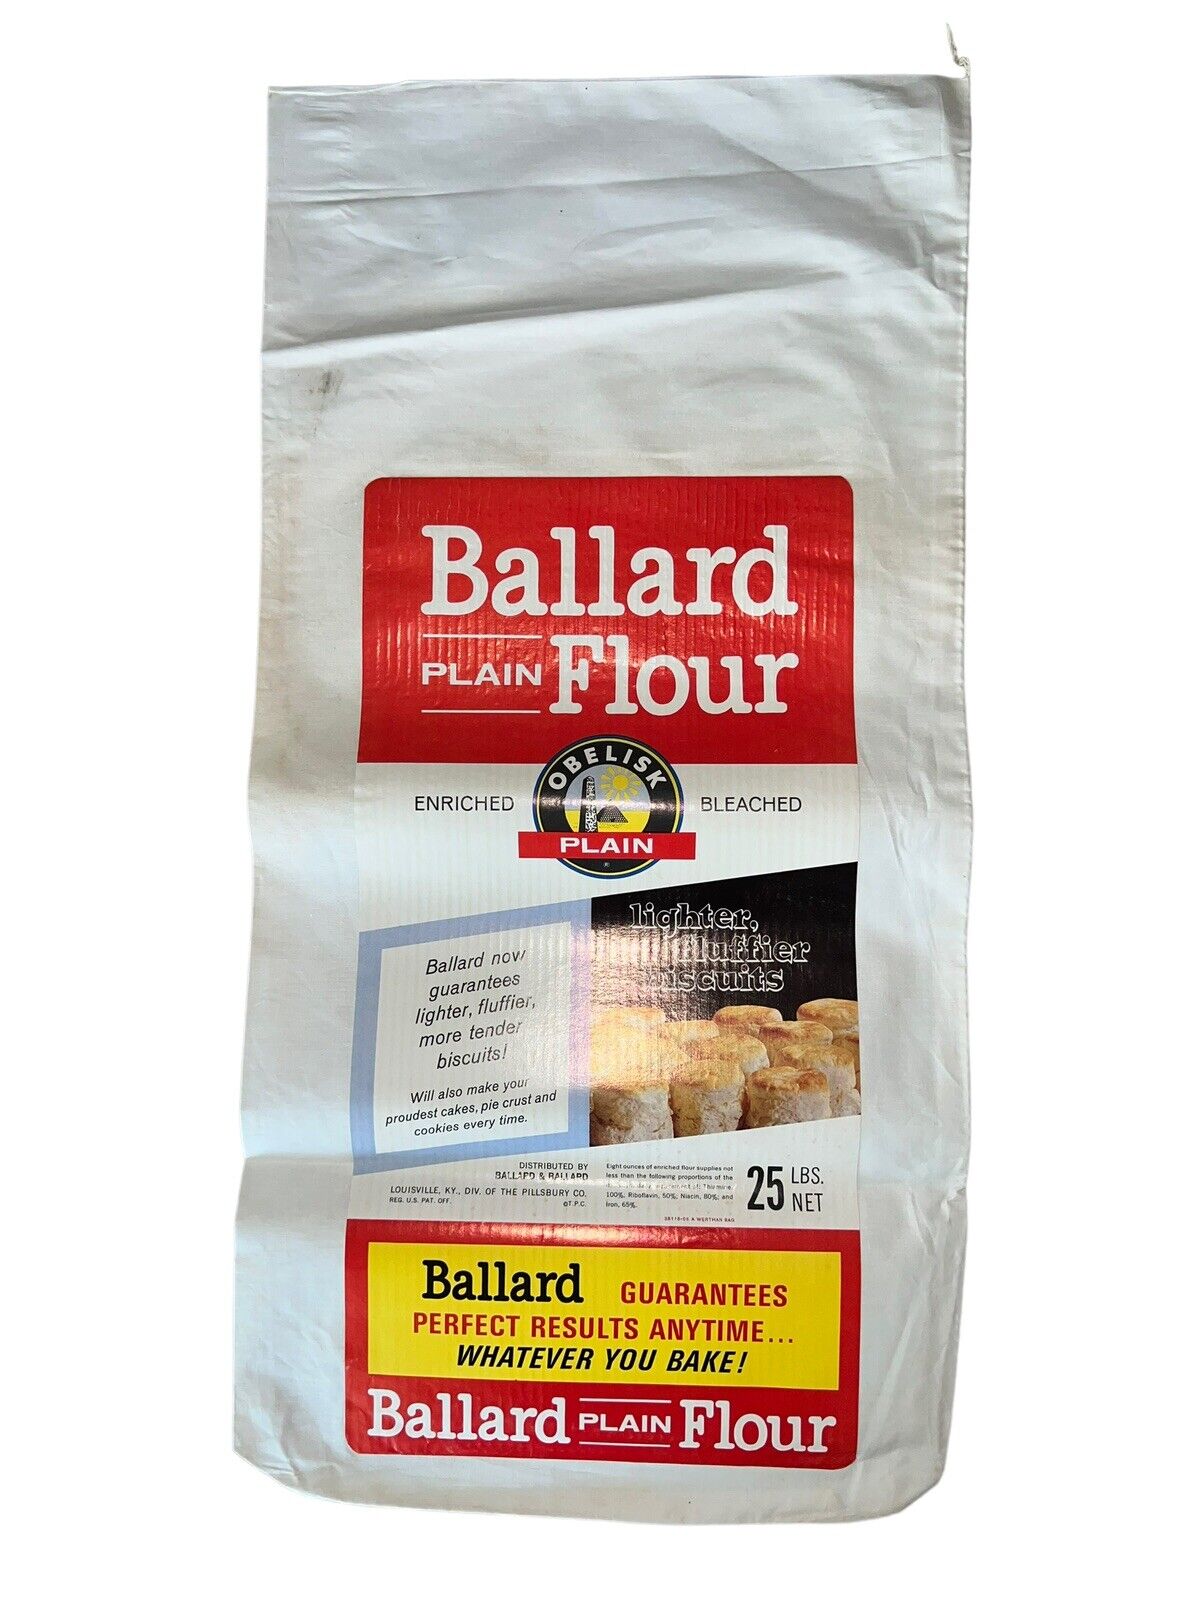 Ballards 25lbs Flour Sack Fabric Paper Label Empty Bag 26 Inches x 13 Inches